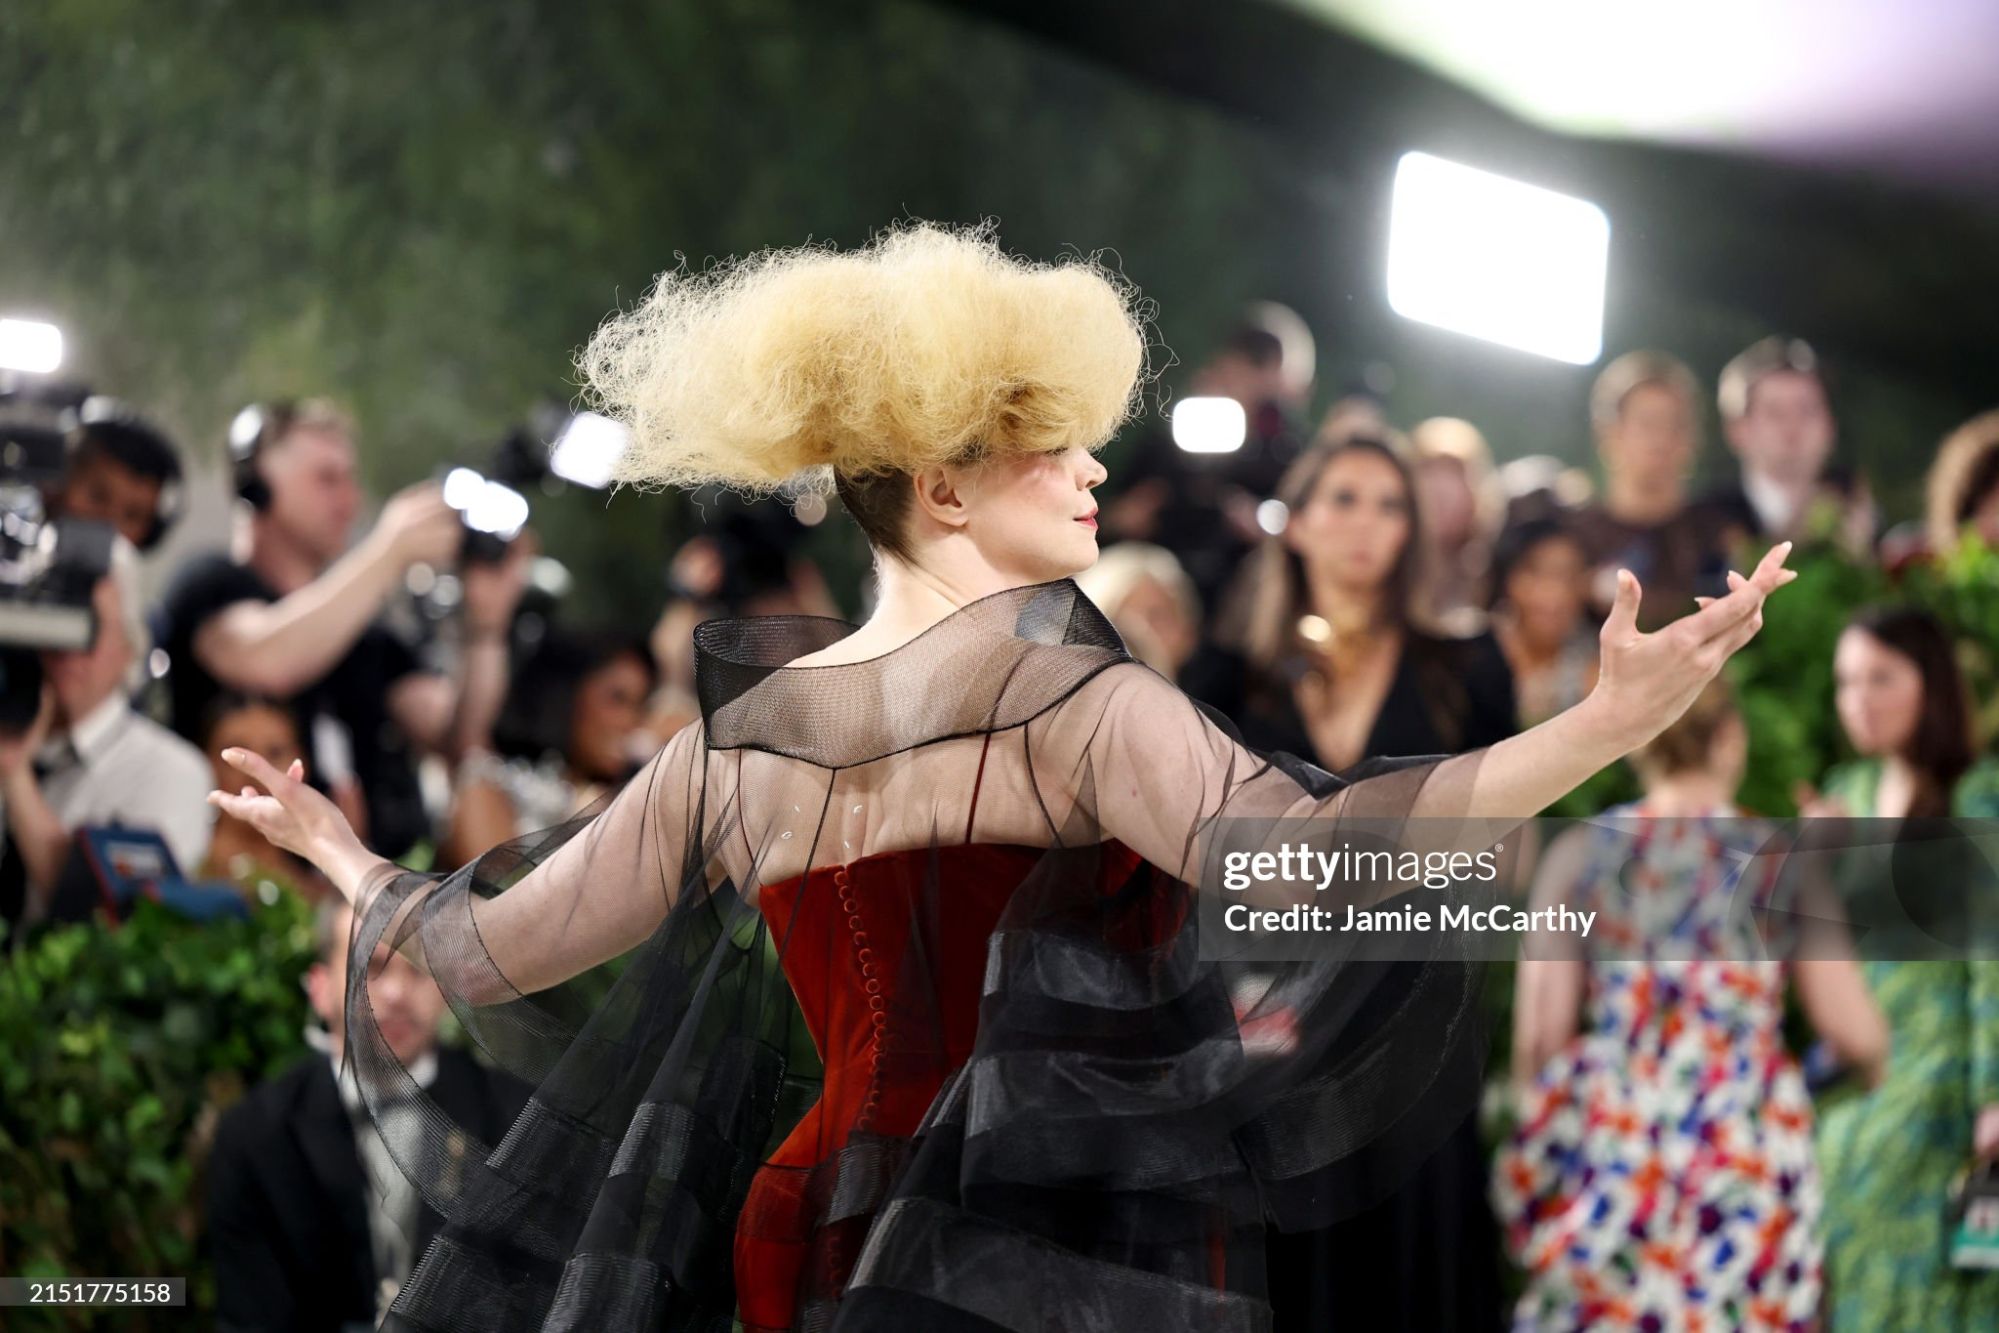 gettyimages-2151775158-2048x2048.jpg